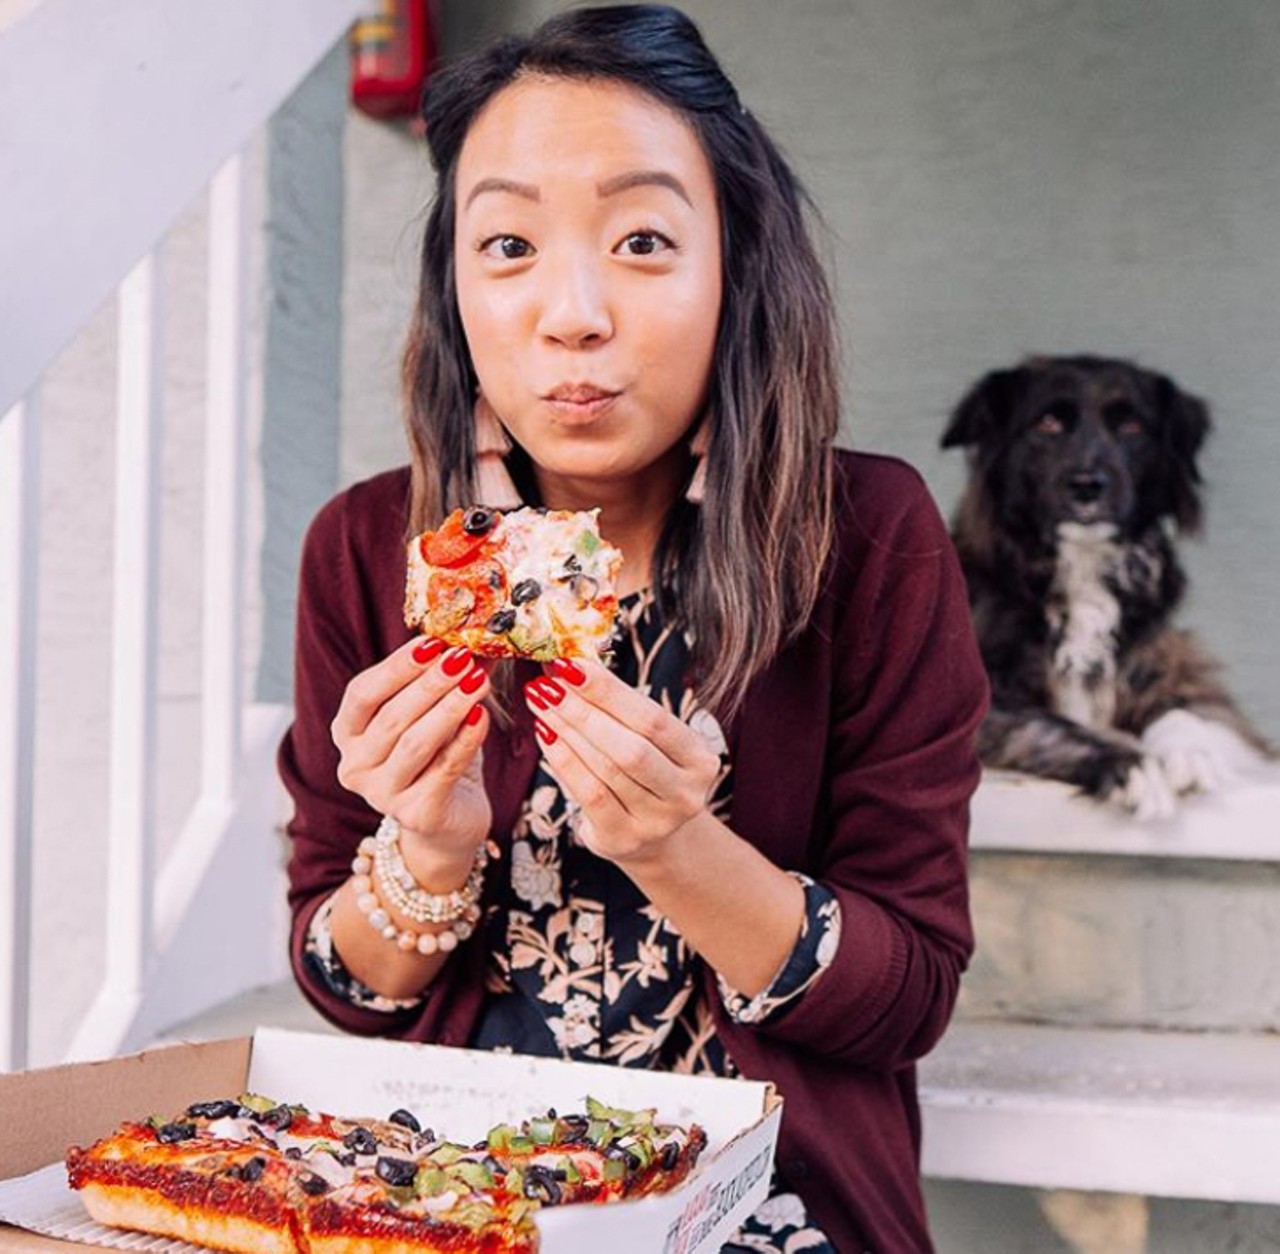 @ThisJennGirl
Sure, Jenn Thai is a Tampa-Based food blogger, but her food-filled-feed is also crammed with beauty recommendations, life in quarantine, and of course, her dog Sadie.
Photo via @ThisJennGirl/Instagram